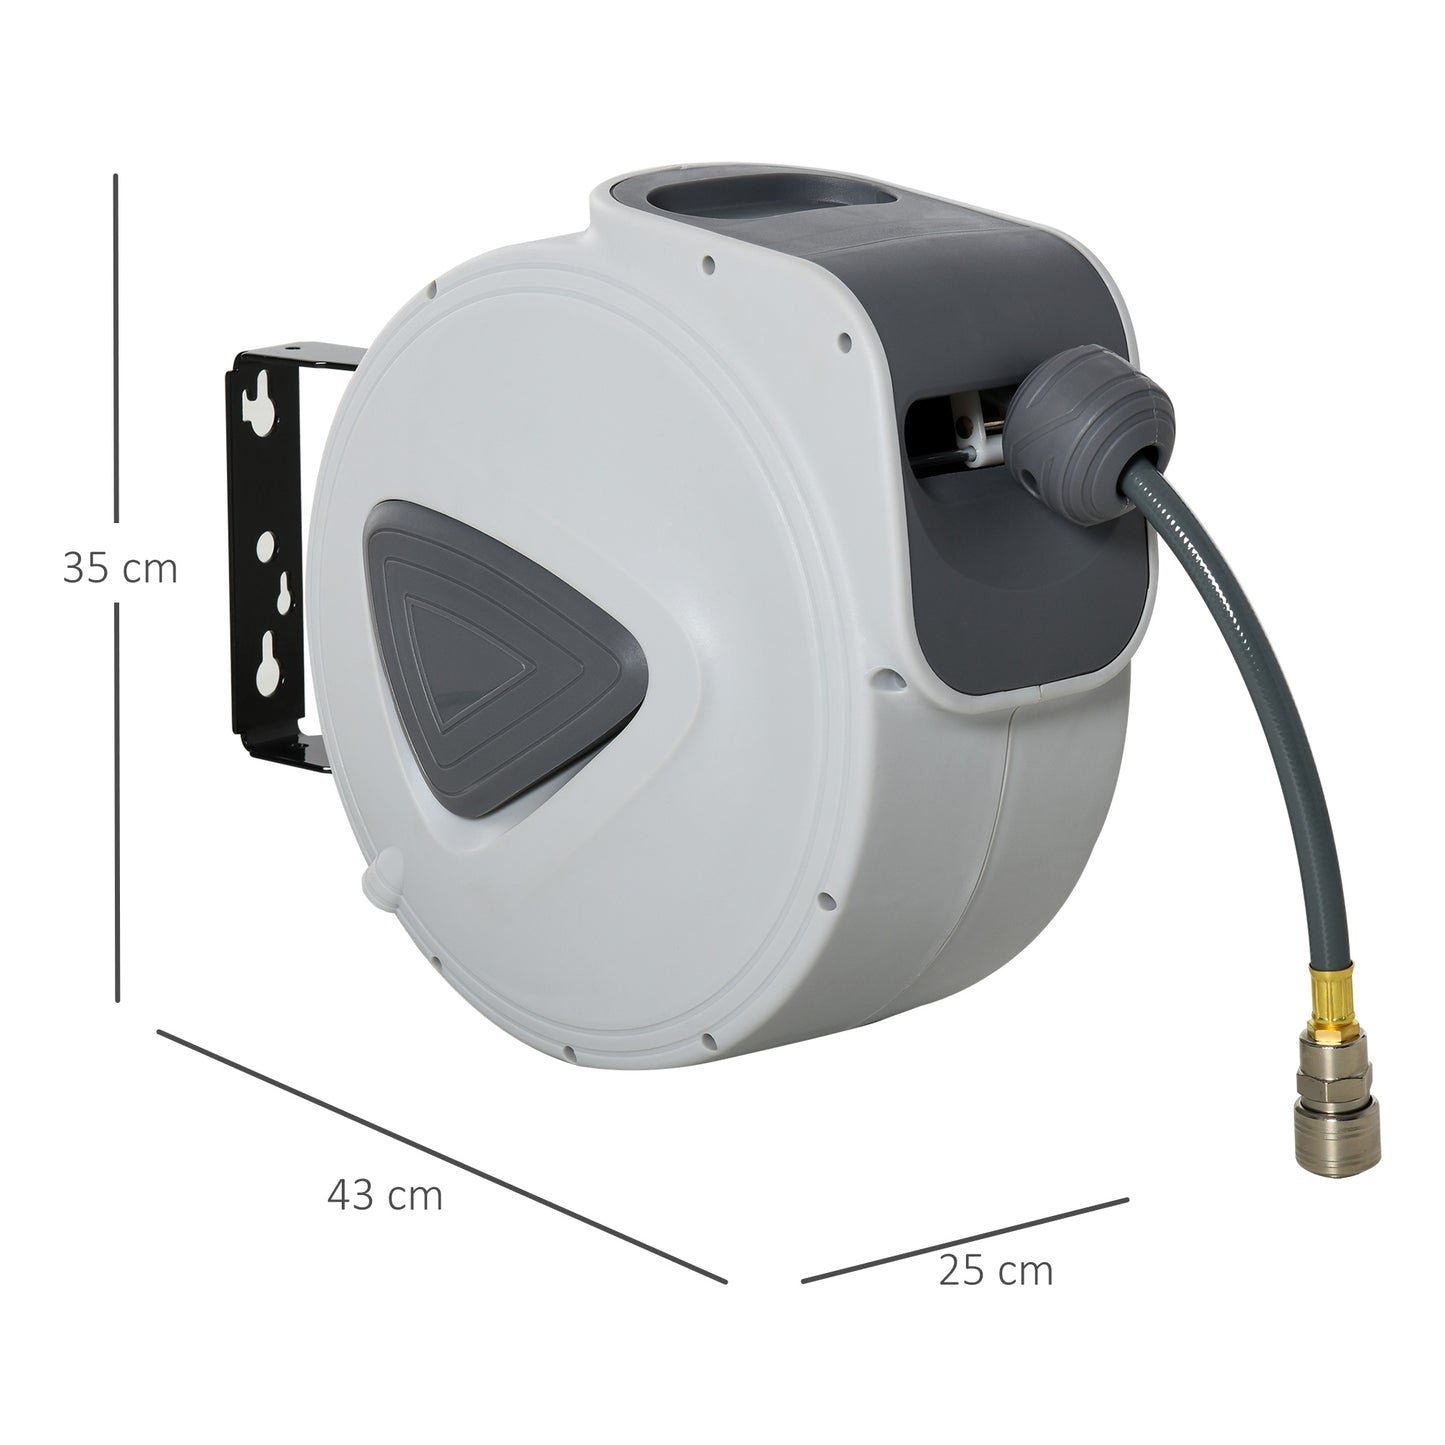 DURHAND Retractable Air Hose Reel Wall Mounted Workshop Compressor Tool 1/4" 15m+140cm